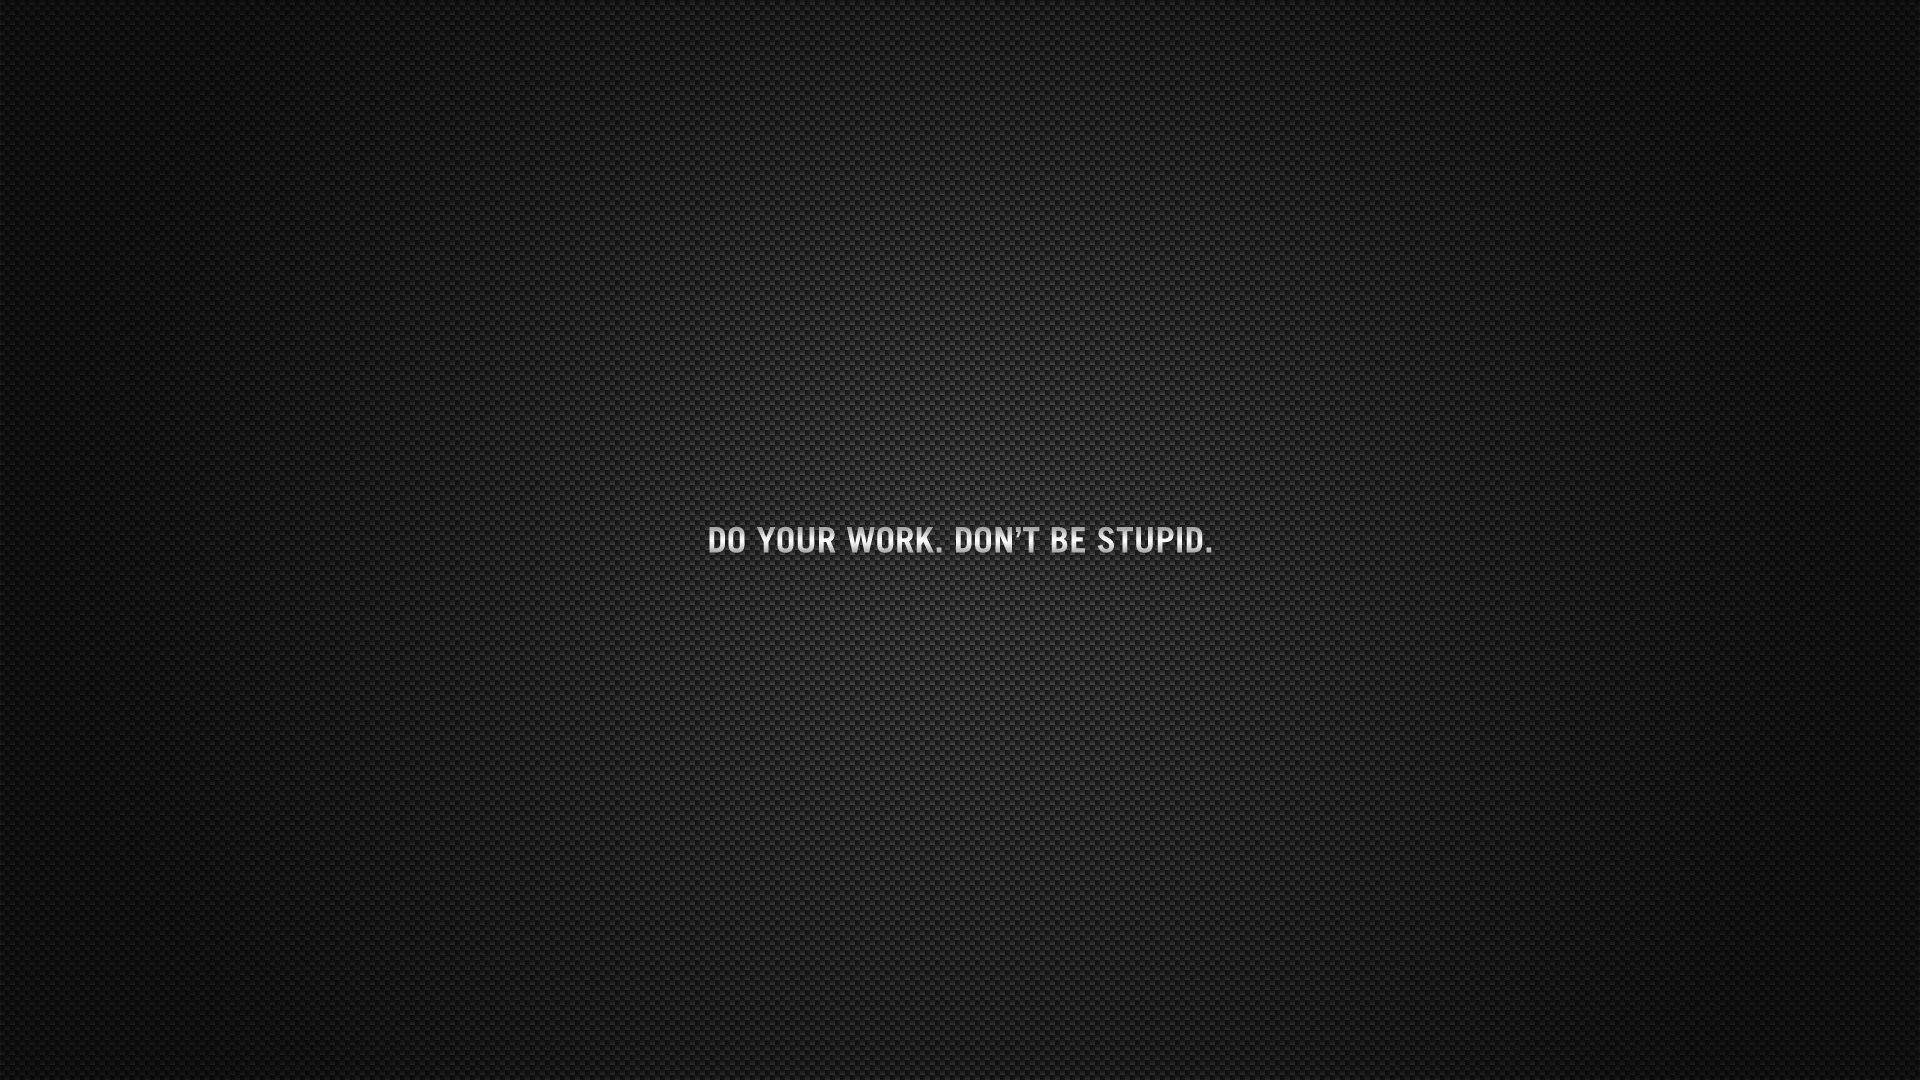 Hard Work Quotes Wallpapers